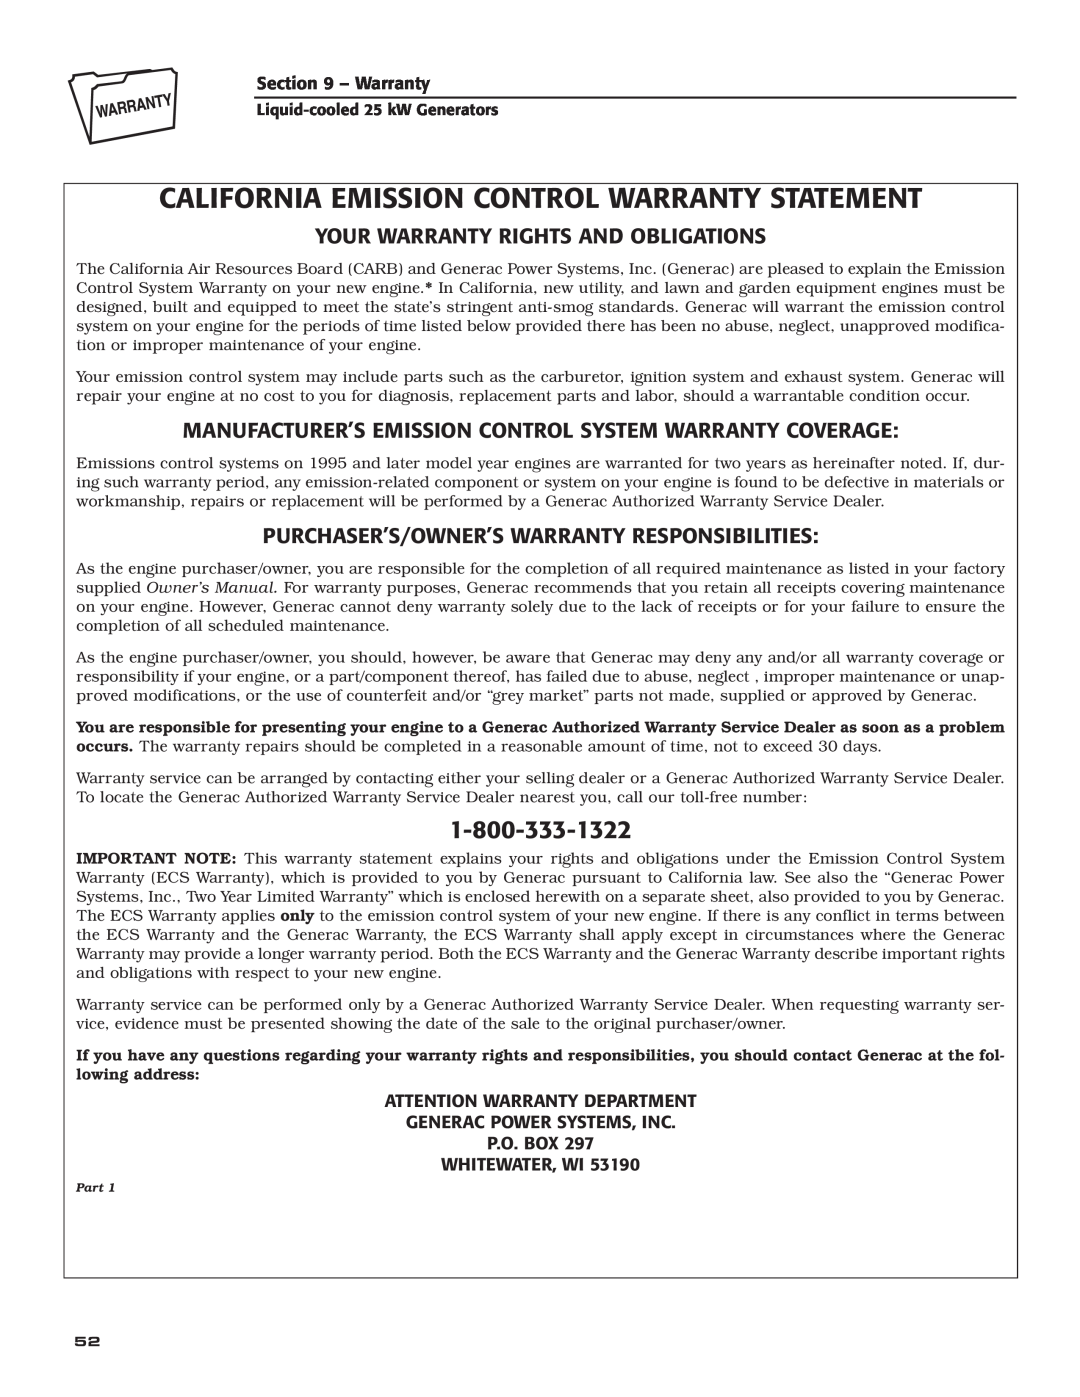 Generac 005031-2 owner manual Your Warranty Rights And Obligations, Purchaser’S/Owner’S Warranty Responsibilities 